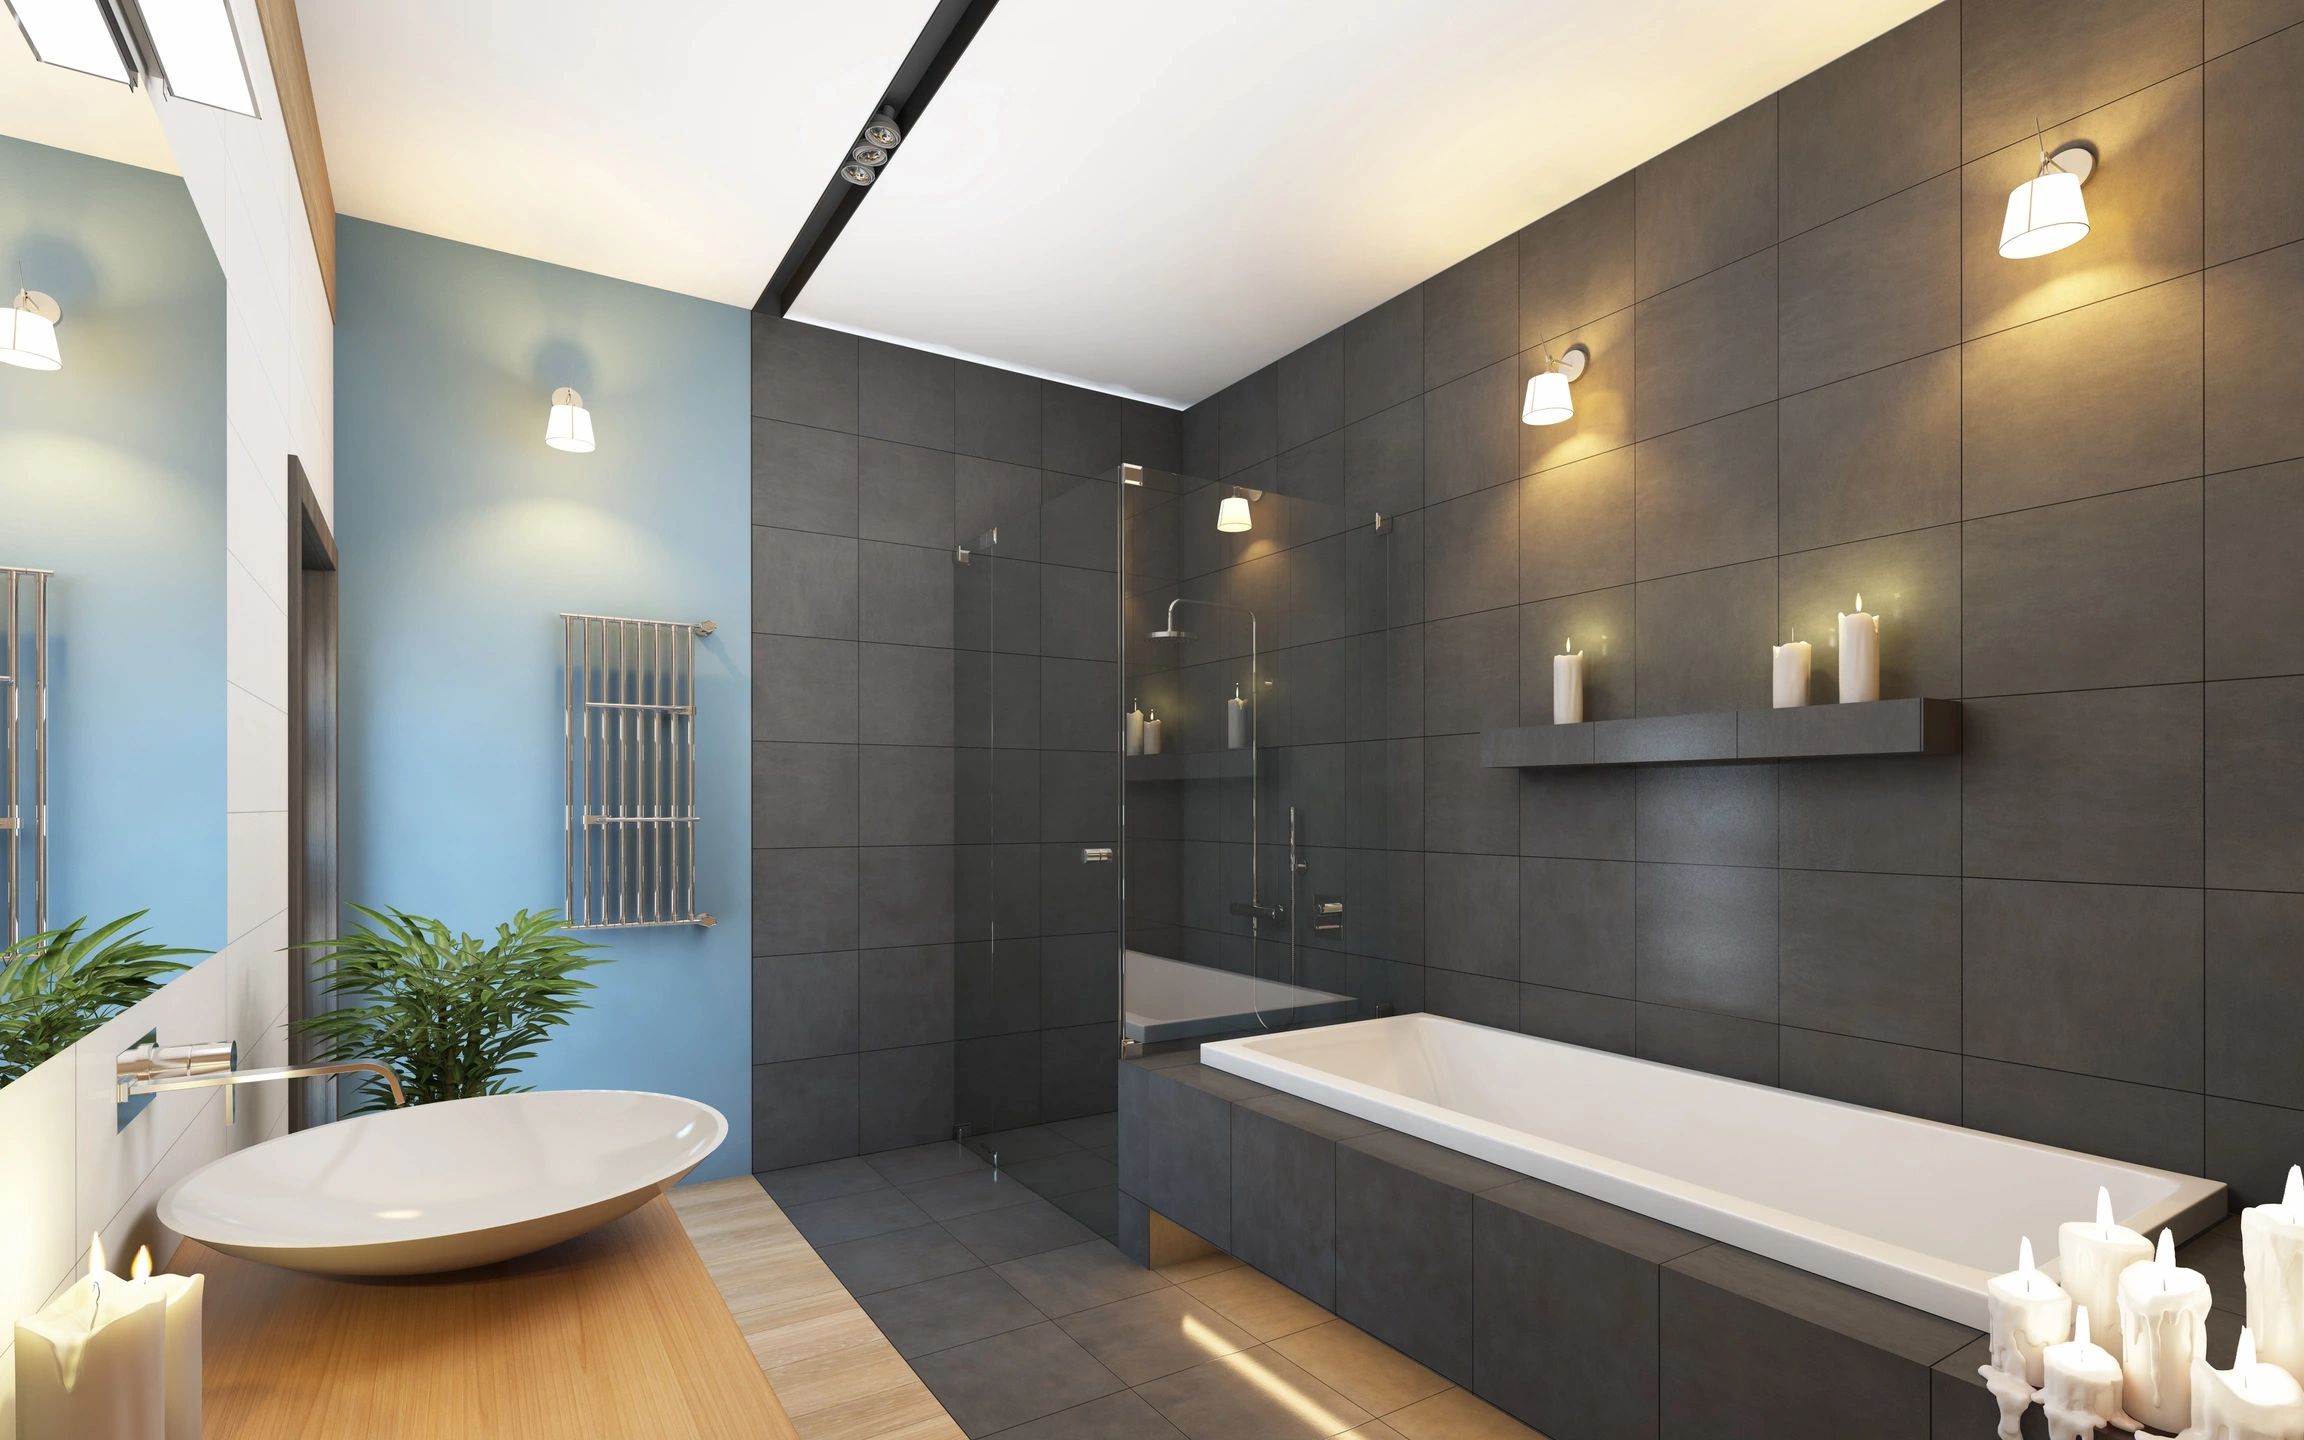 How To Revamp Your Bathroom For A More Hygienic Space